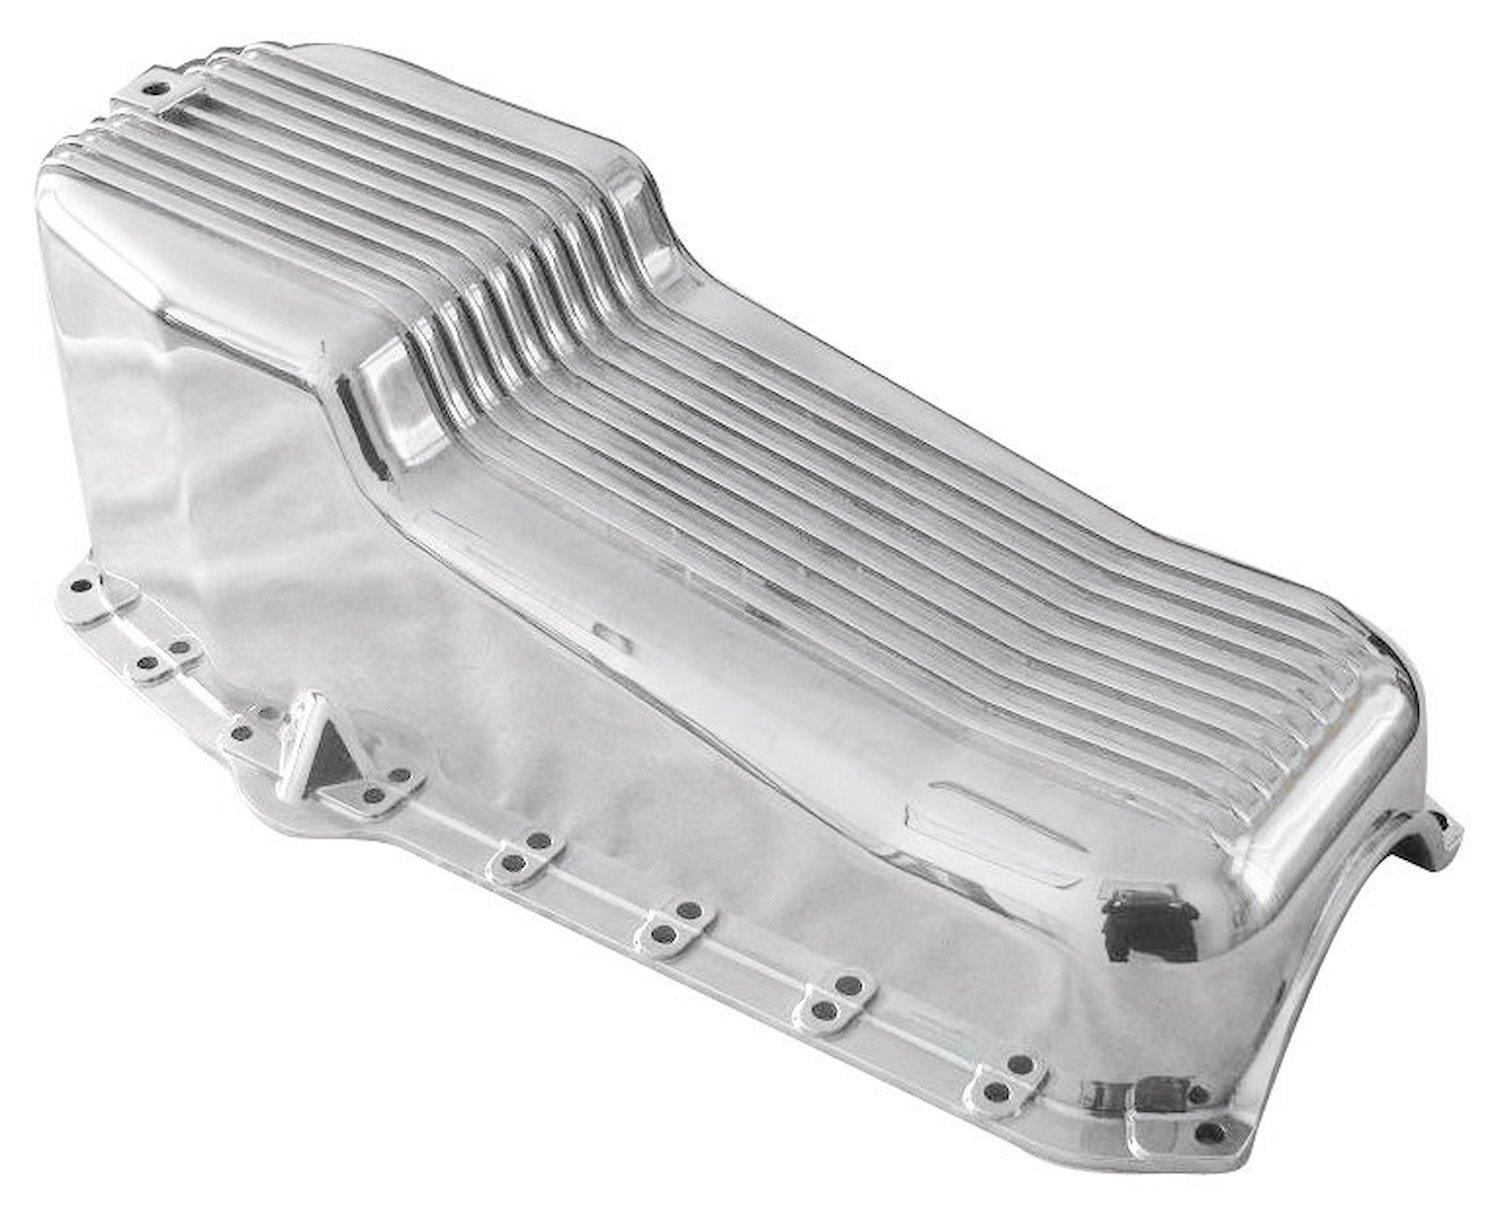 Finned Aluminum Oil Pan Small Block Chevy 350 - Polished Finish